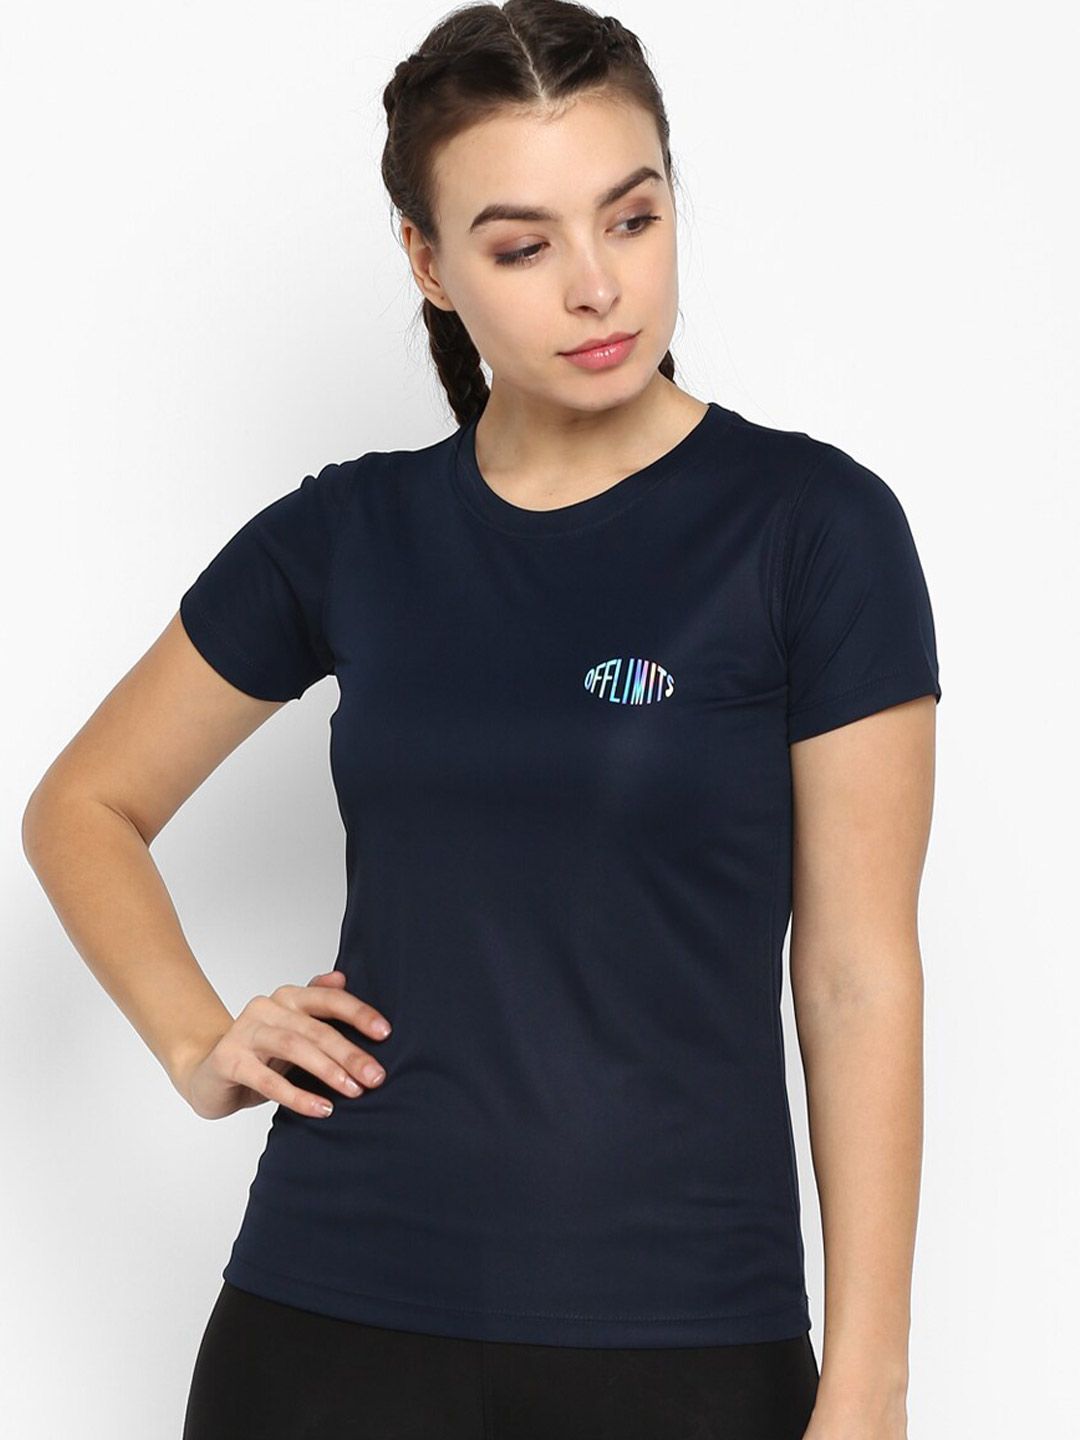 OFF LIMITS Women Navy Blue Slim Fit T-shirt Price in India